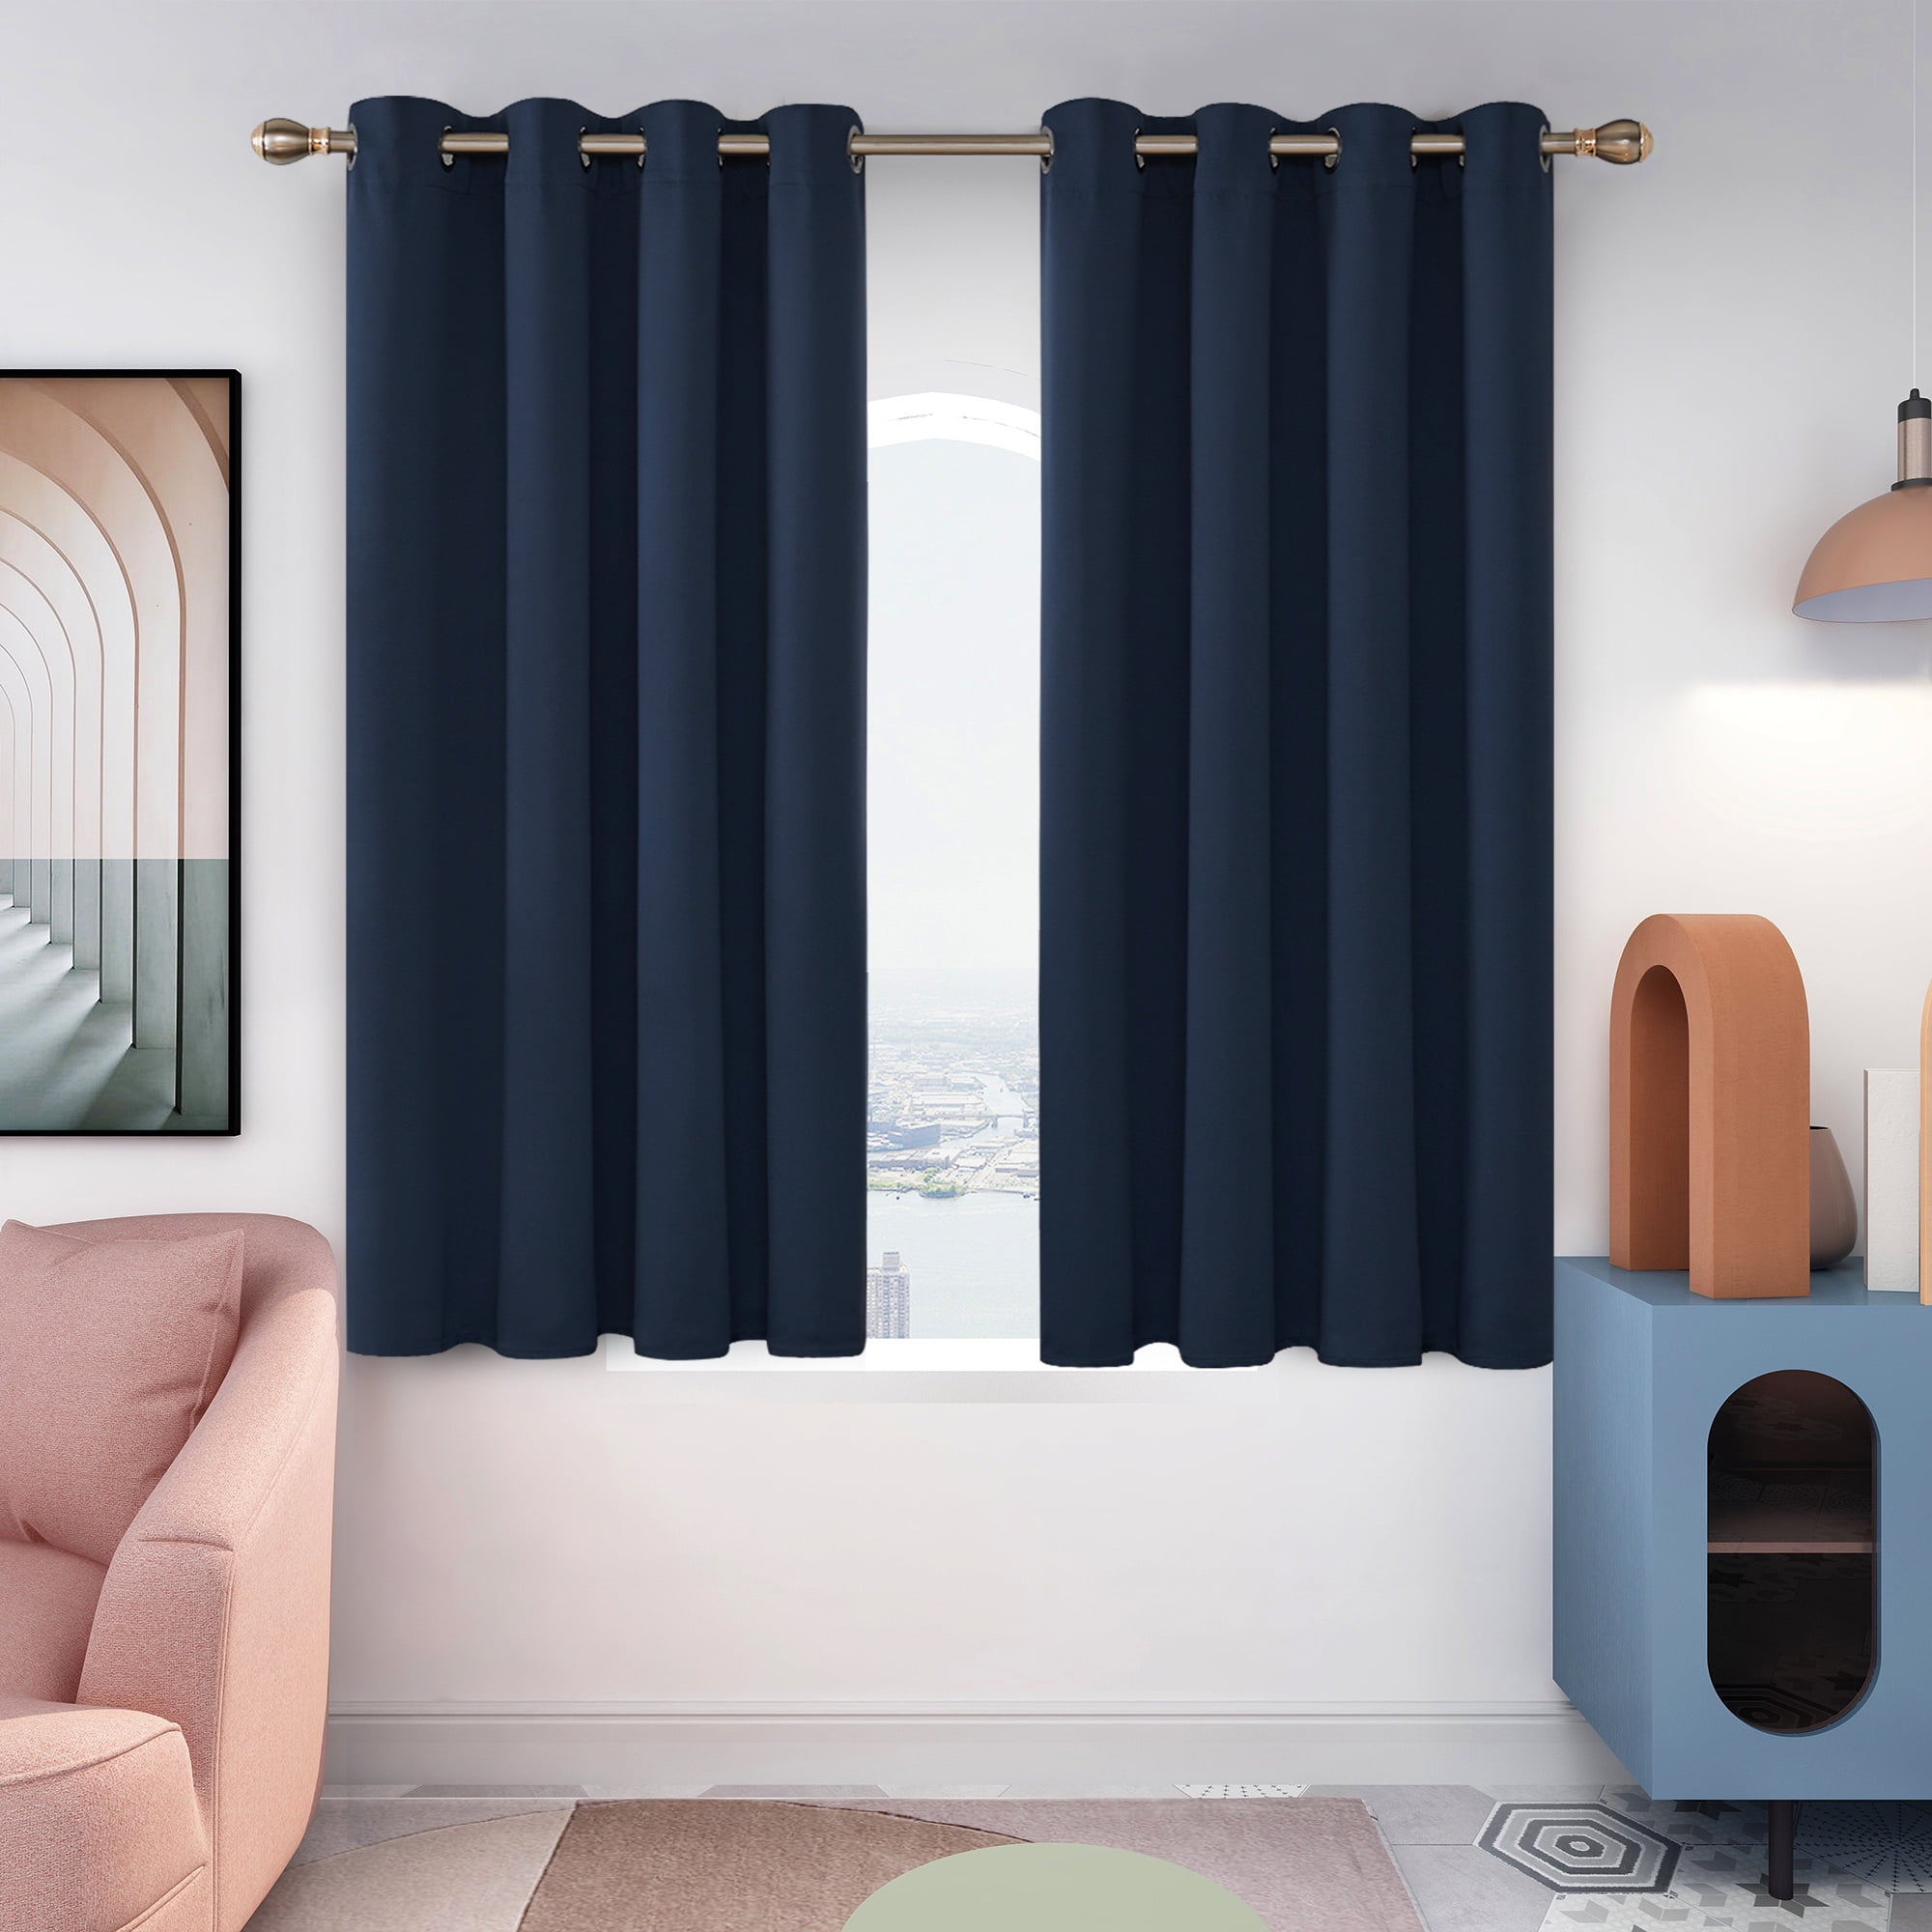 Deconovo Grommet Faux Linen Window Curtains Linen Look Panels Solid Drapes for Kitchen Small Window Navy Blue 52x45 Inch 2 Panels